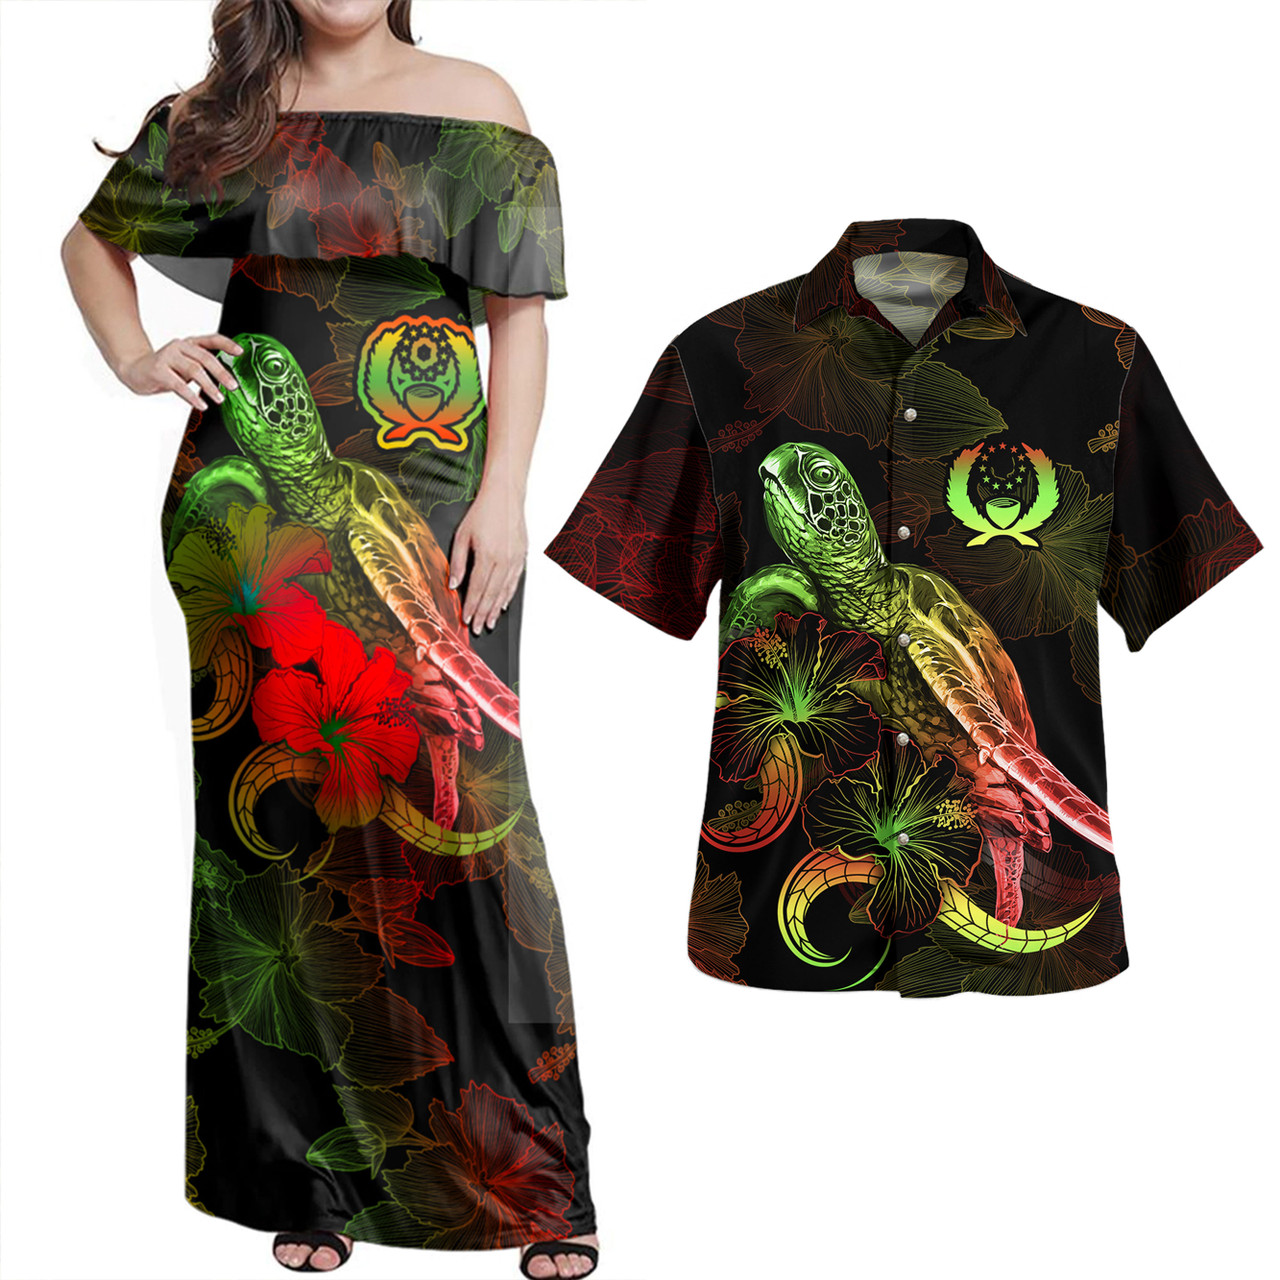 Pohnpei State Combo Dress And Shirt - Sea Turtle With Blooming Hibiscus Flowers Reggae